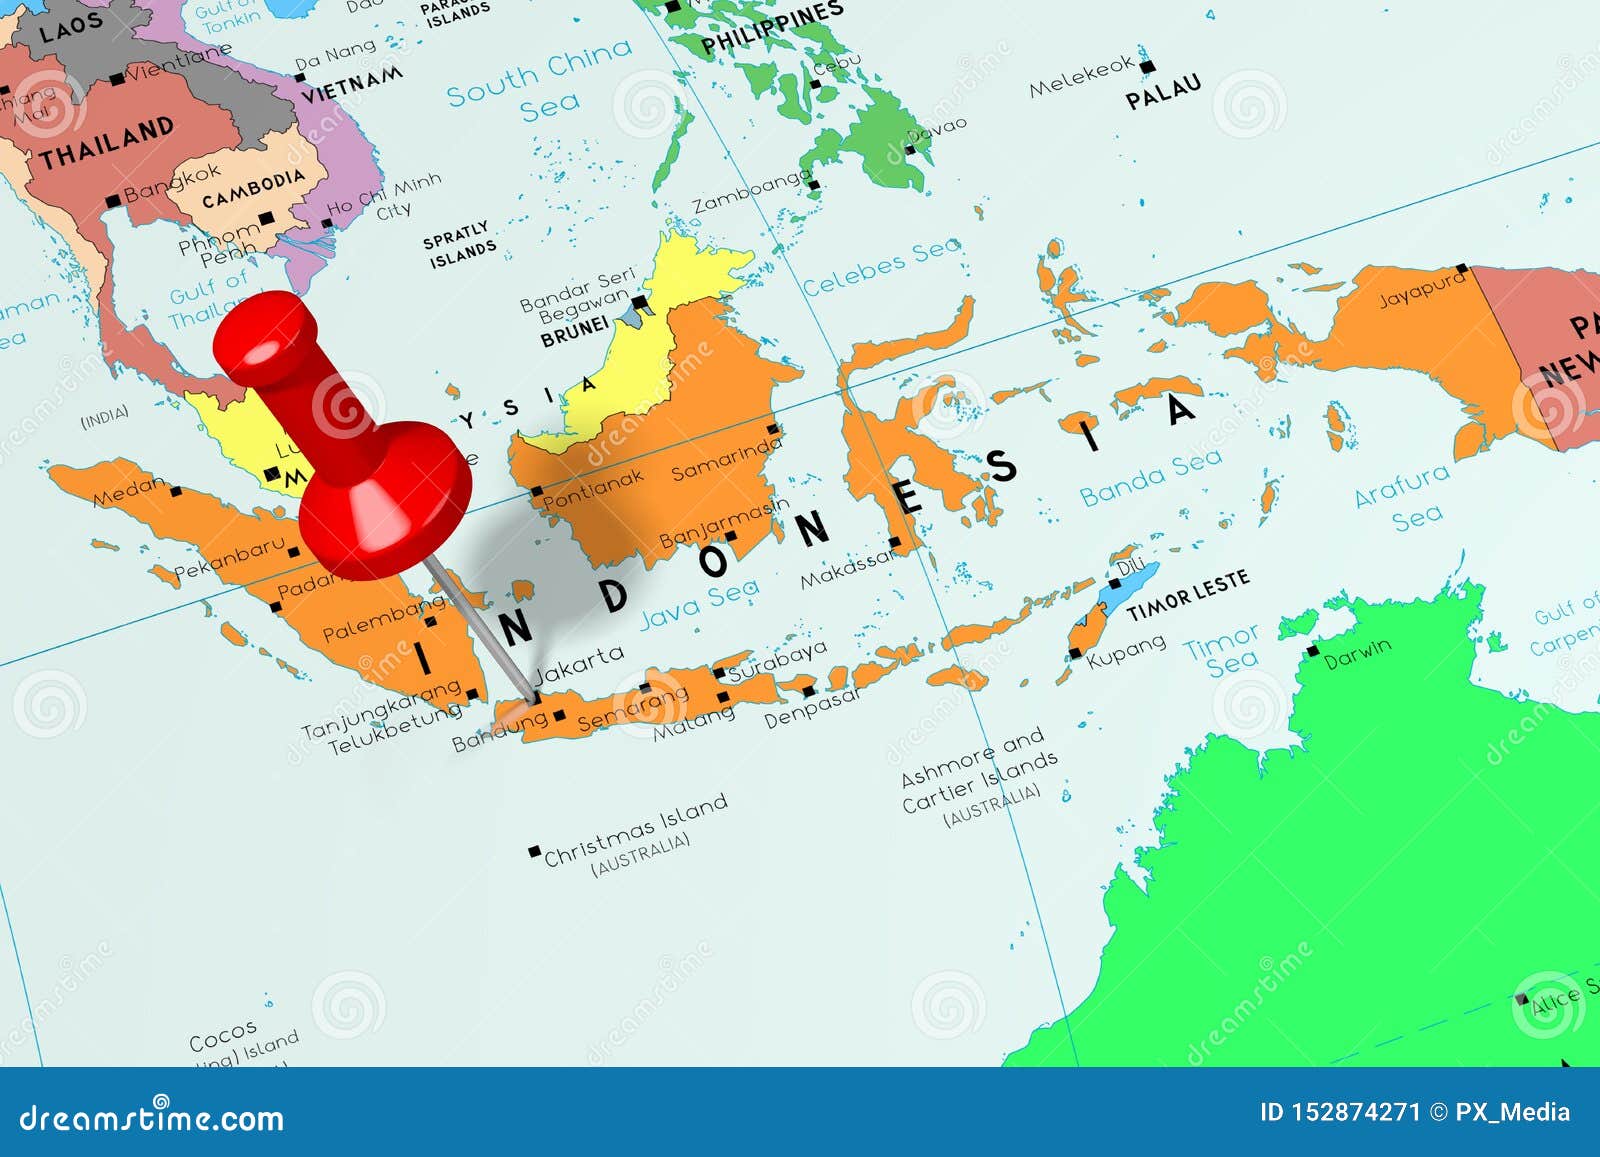 Indonesia Jakarta  Capital City Pinned On Political Map  